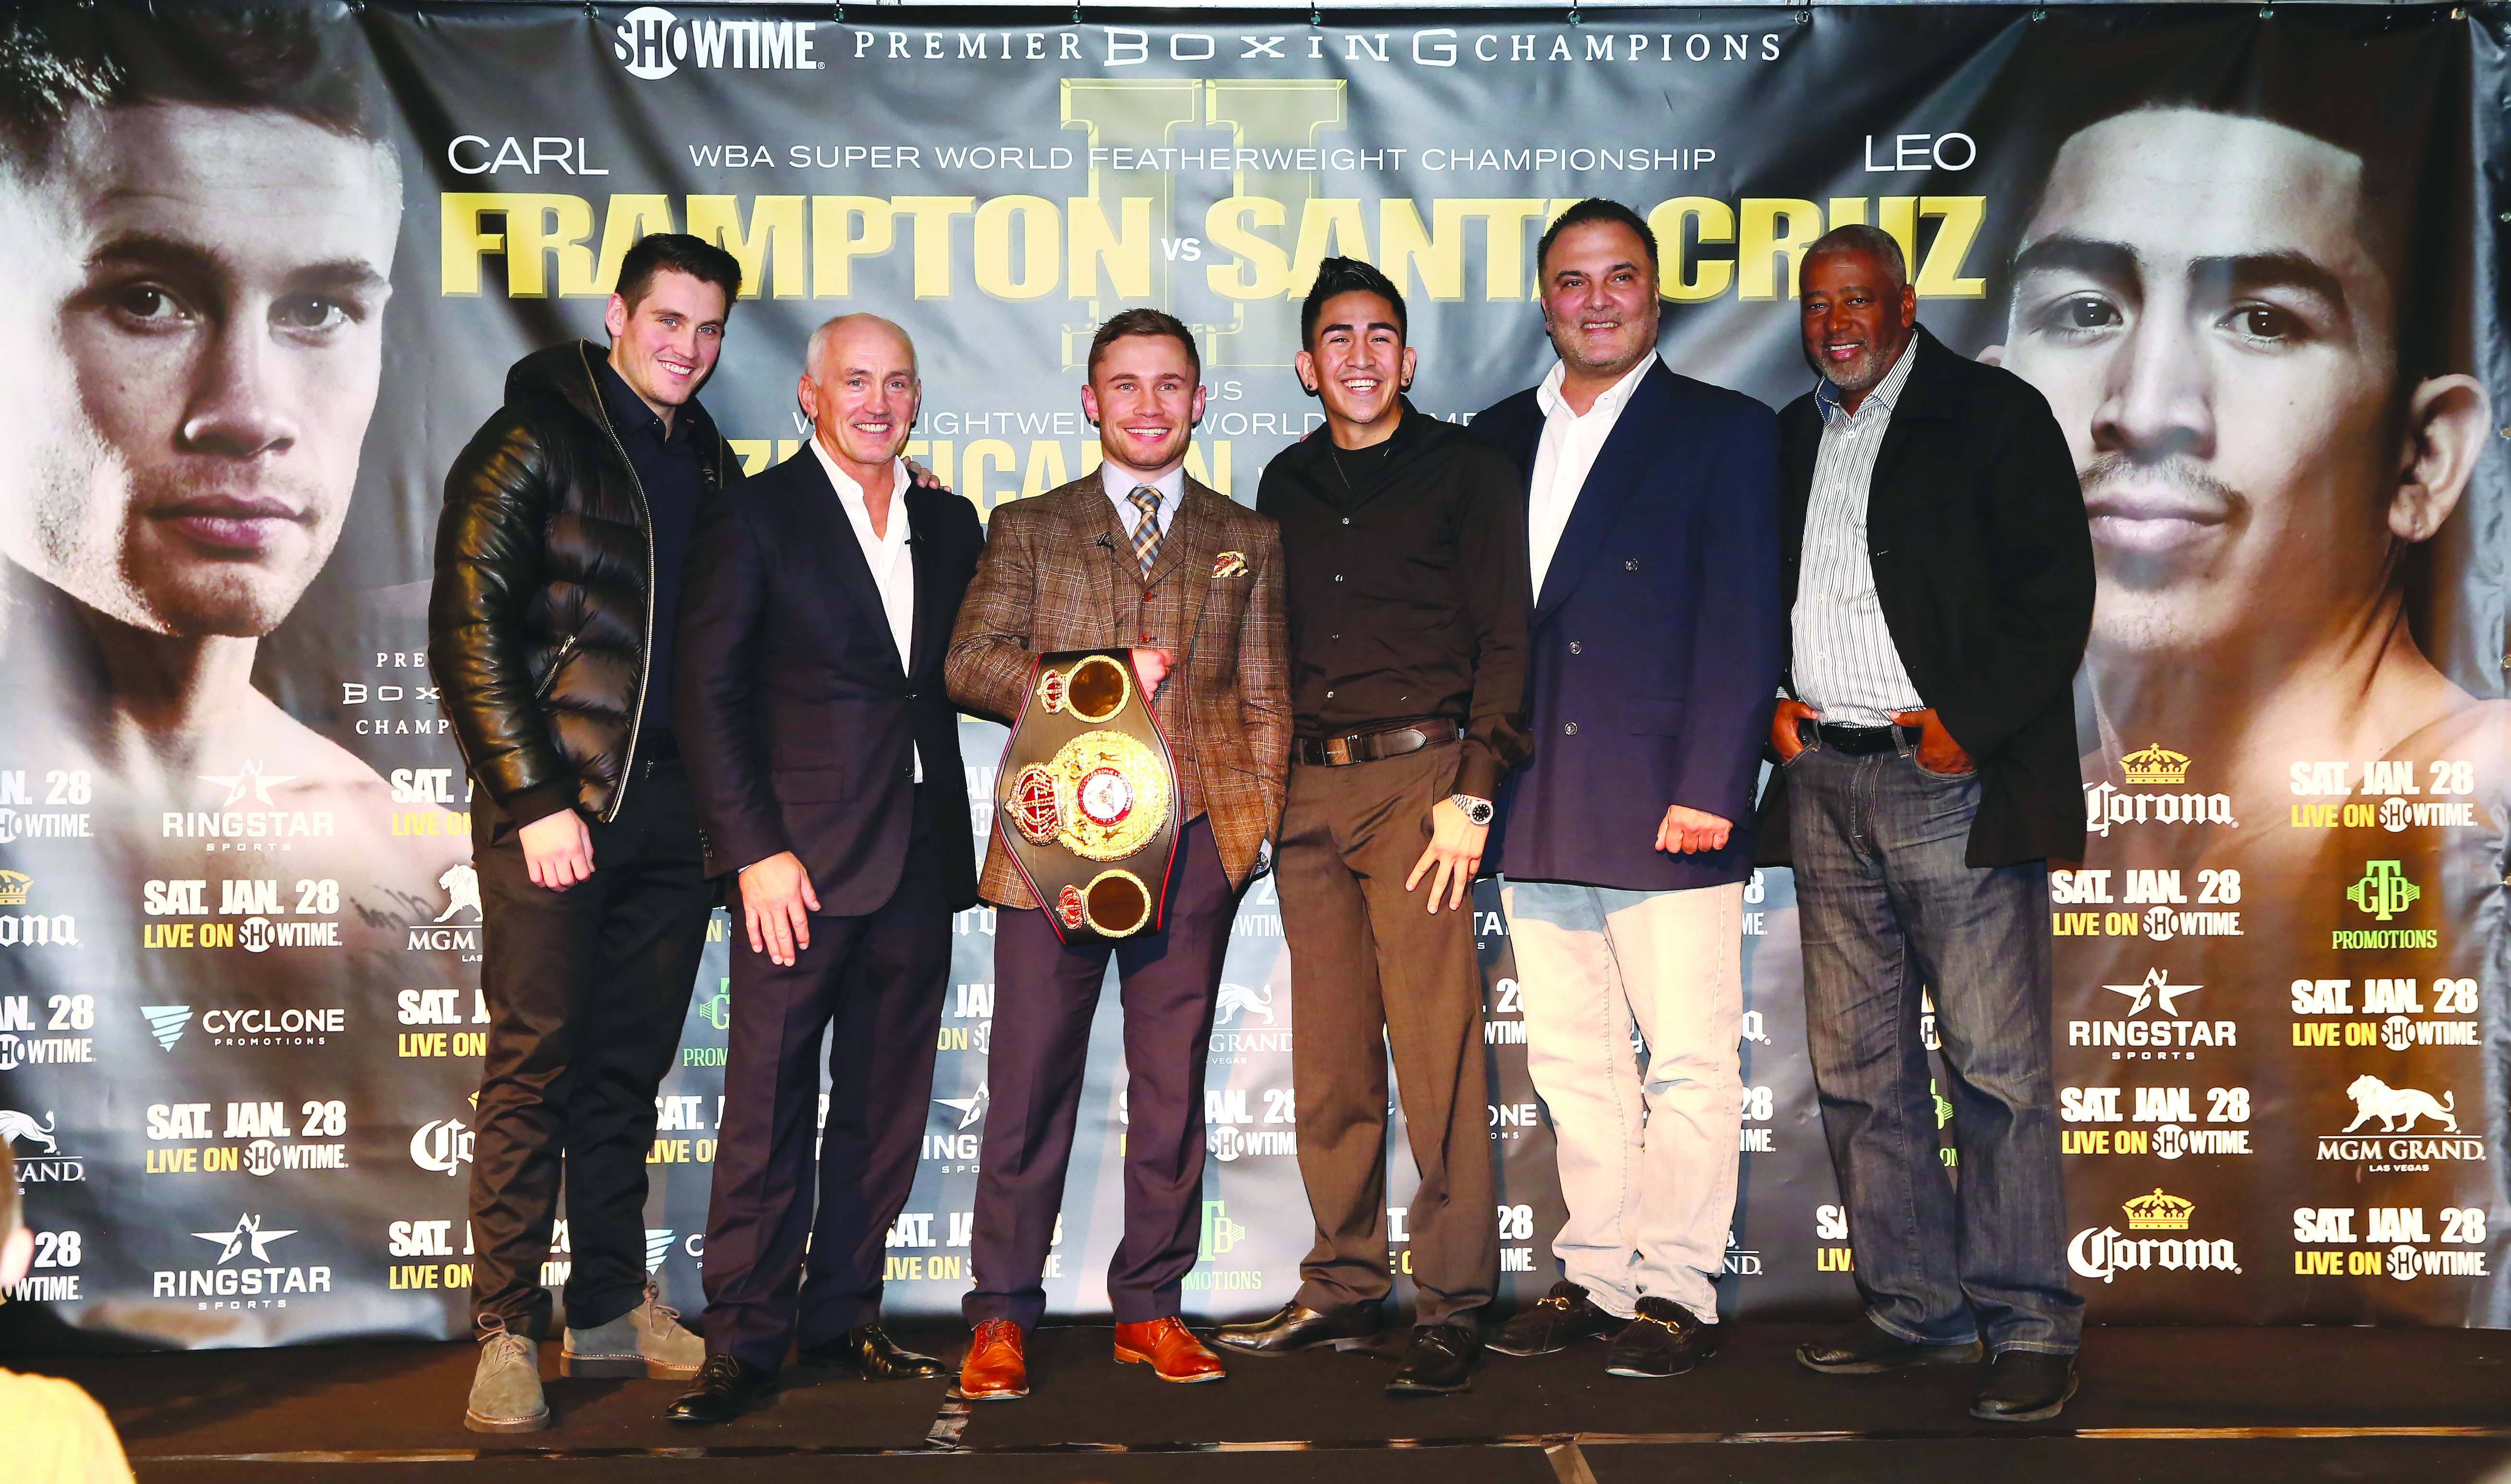 Carl Frampton and Leo Santa Cruz are joined by (L-R) Shane McGuigan (Frampton’s trainer), Barry McGuigan (Frampton’s manager), Richard Schaefer (Ringstar Sports promoter) and Sam Watson (Al Haymon representative) at Tuesday’s press conference at the Europa Hotel to promote the rematch between Frampton and Santa Cruz on January 28 in Las Vegas\nPress Eye - Photo by William Cherry